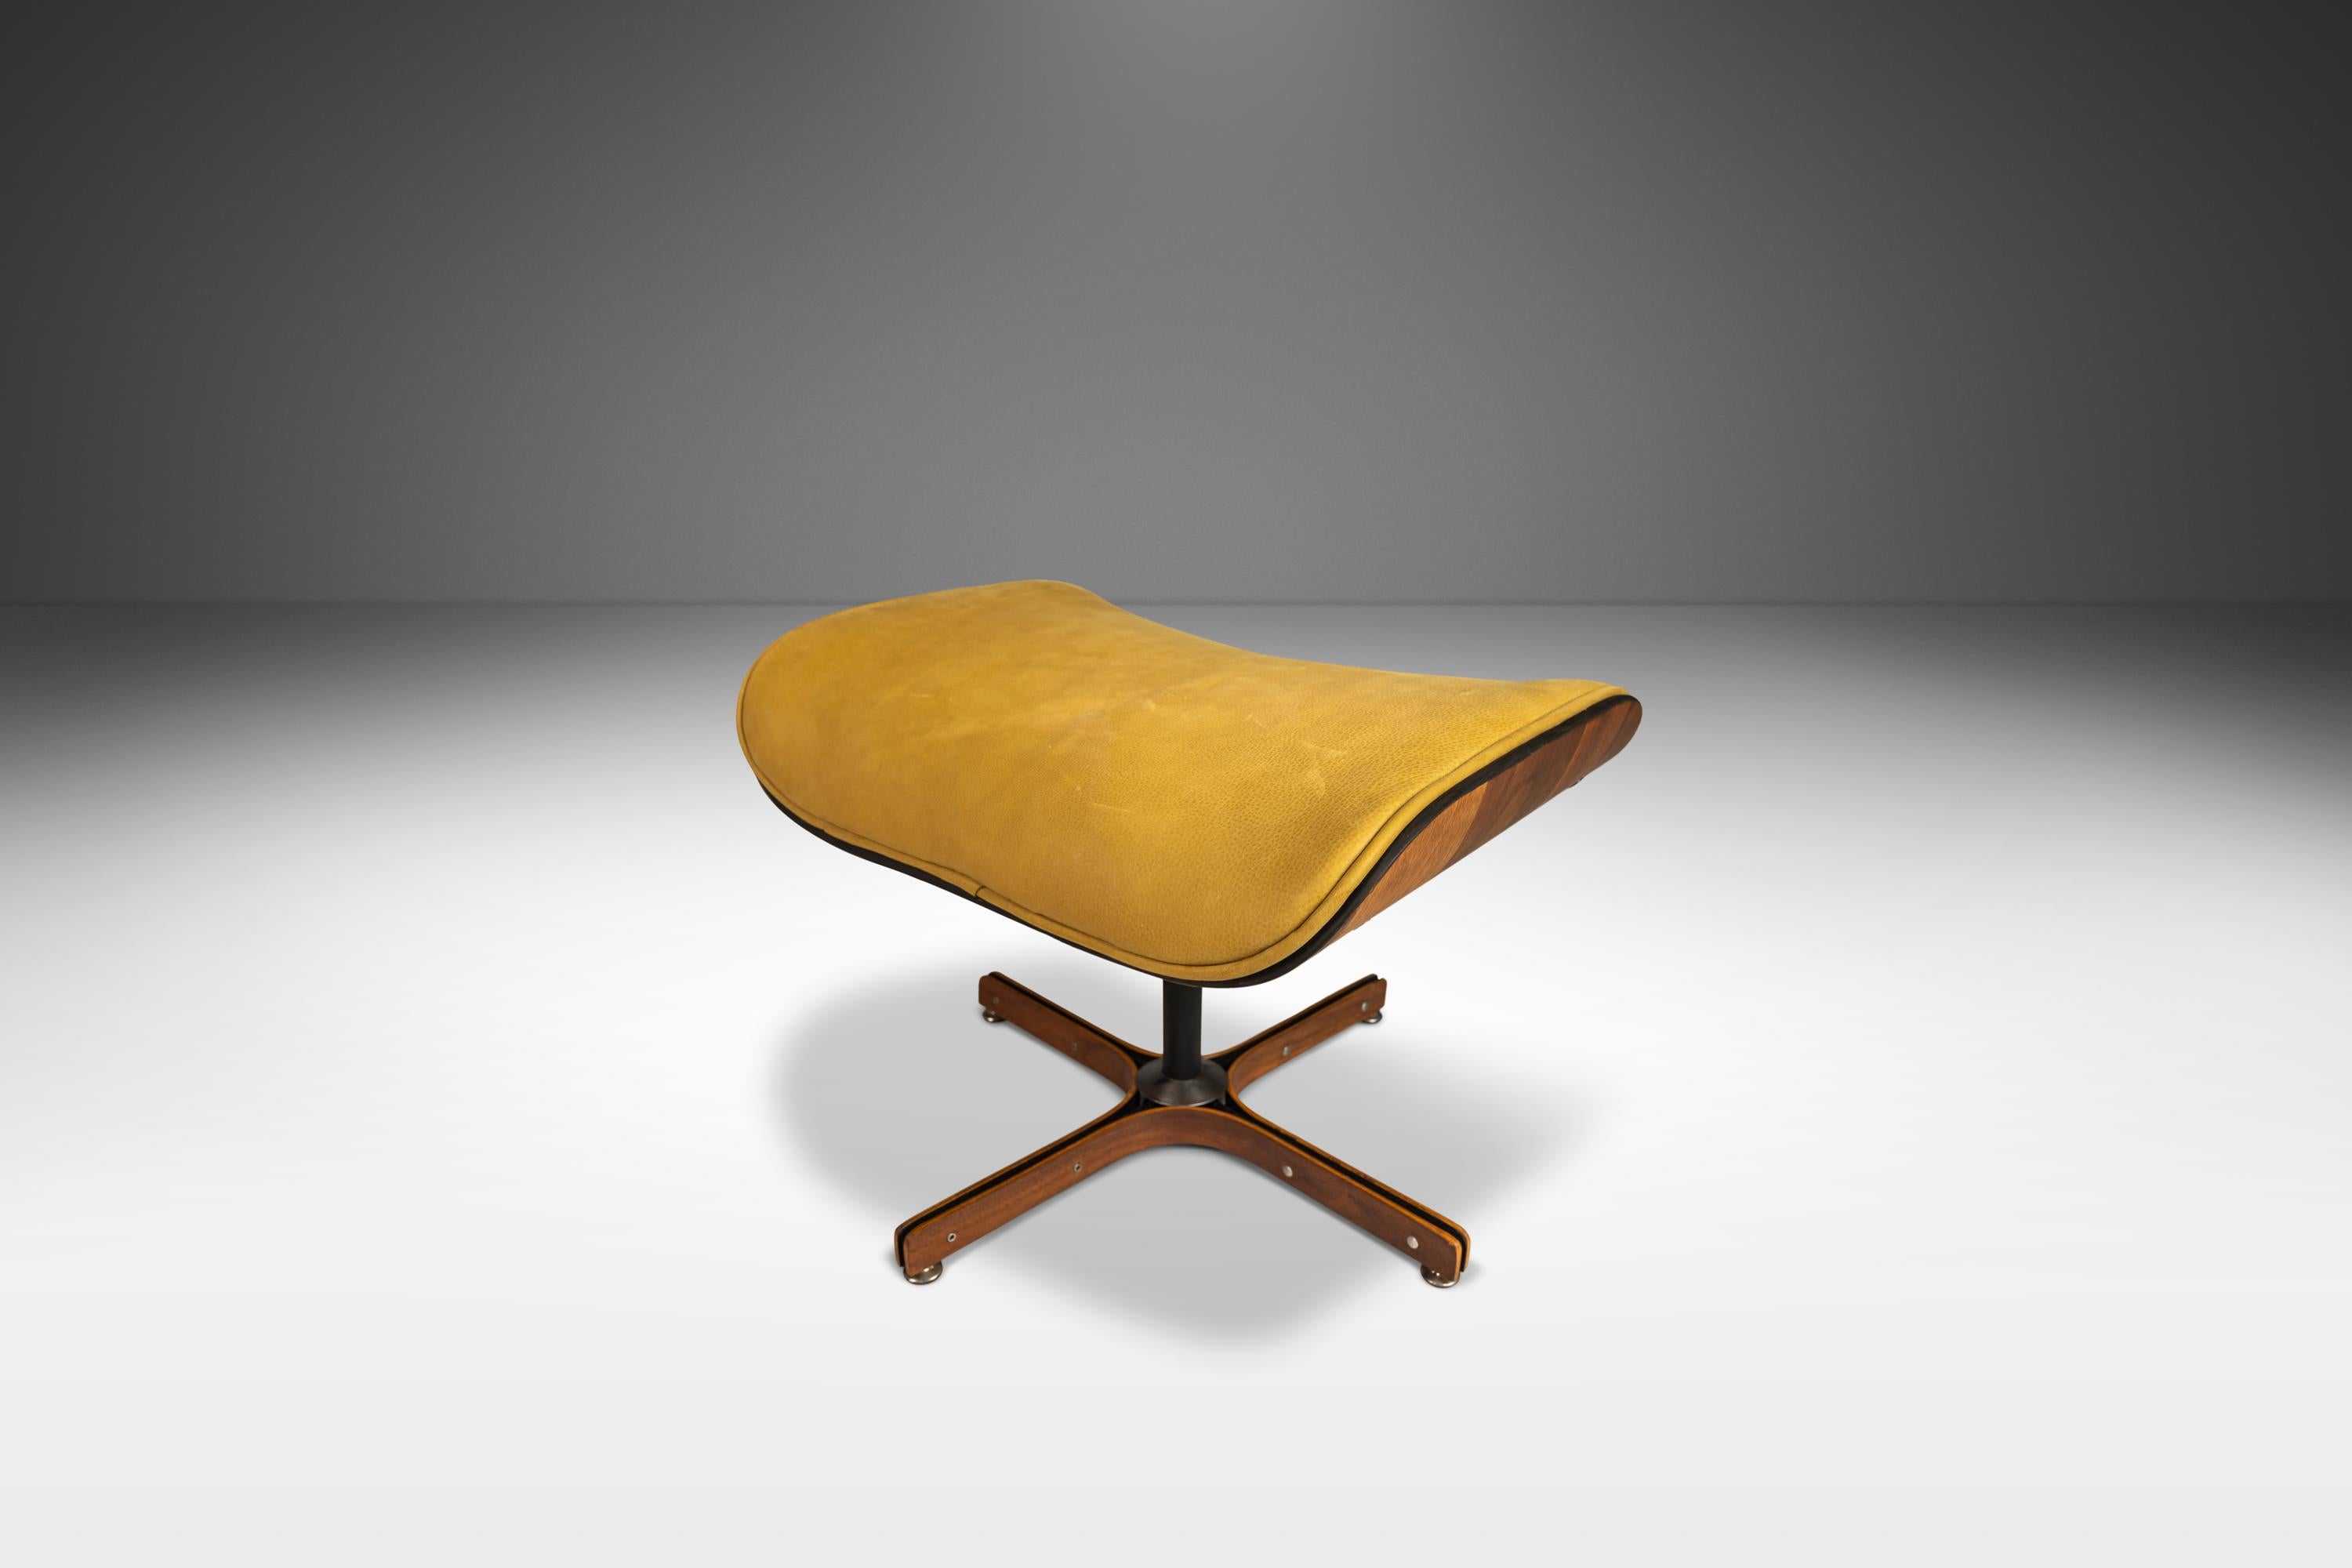 American Bentwood Ottoman That Pairs Well w/ Mr. Chair Lounger by George Mulhauser, 1960s